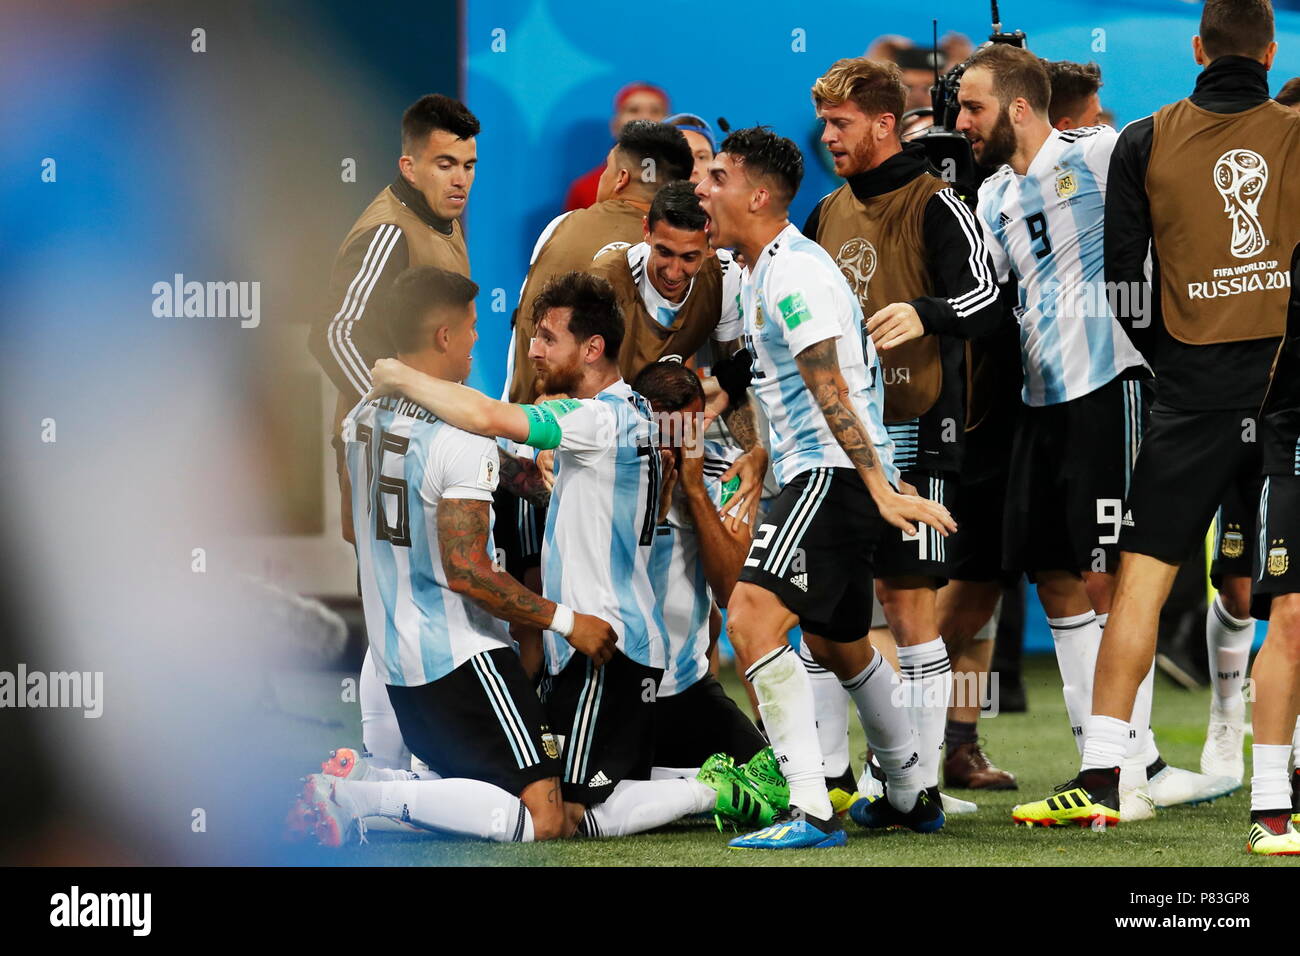 Saint Petersburg, Russia. 26th June, 2018. Argentina team group (ARG) Football/Soccer : Argentina team group celebrate after Rojo's goal on FIFA World Cup Russia 2018 match between Nigeria 1-2 Argentina at the Saint Petersburg Stadium in Saint Petersburg, Russia . Credit: Mutsu KAWAMORI/AFLO/Alamy Live News Stock Photo